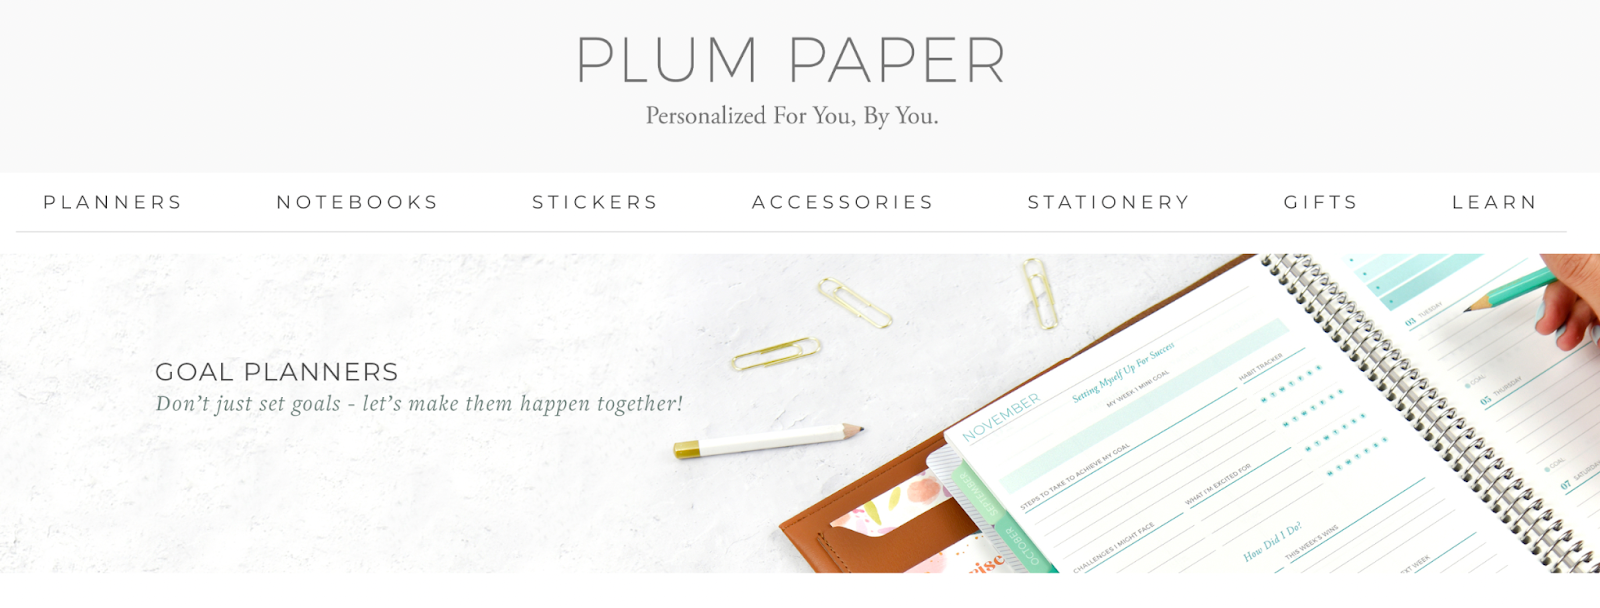 best gifts for sales reps, goal planner from Plum Paper